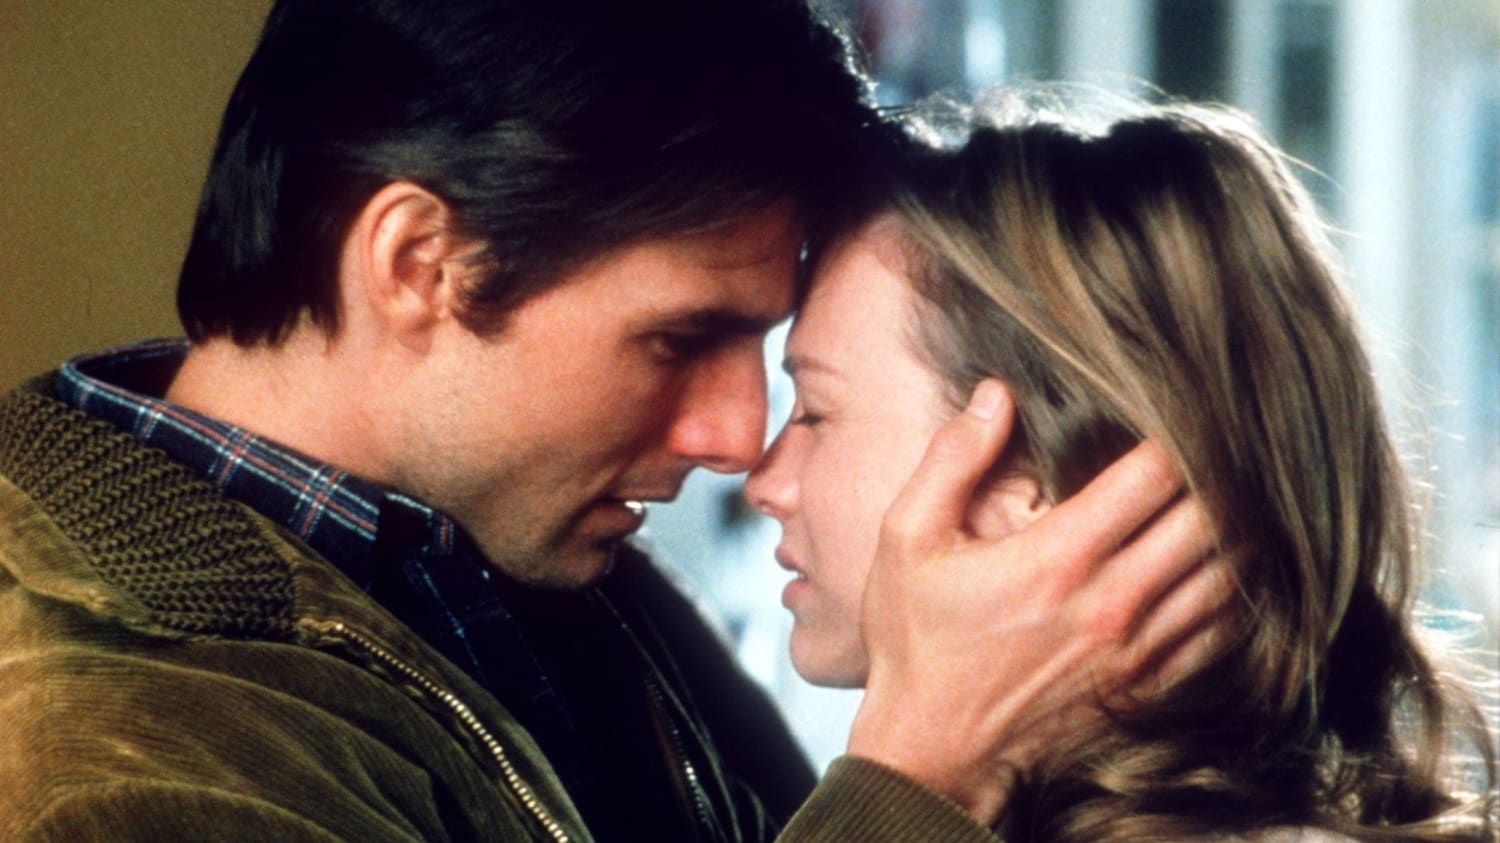 Renee Zellweger gives 'Jerry Maguire' co-star Tom Cruise a shout-out at the SAG Awards